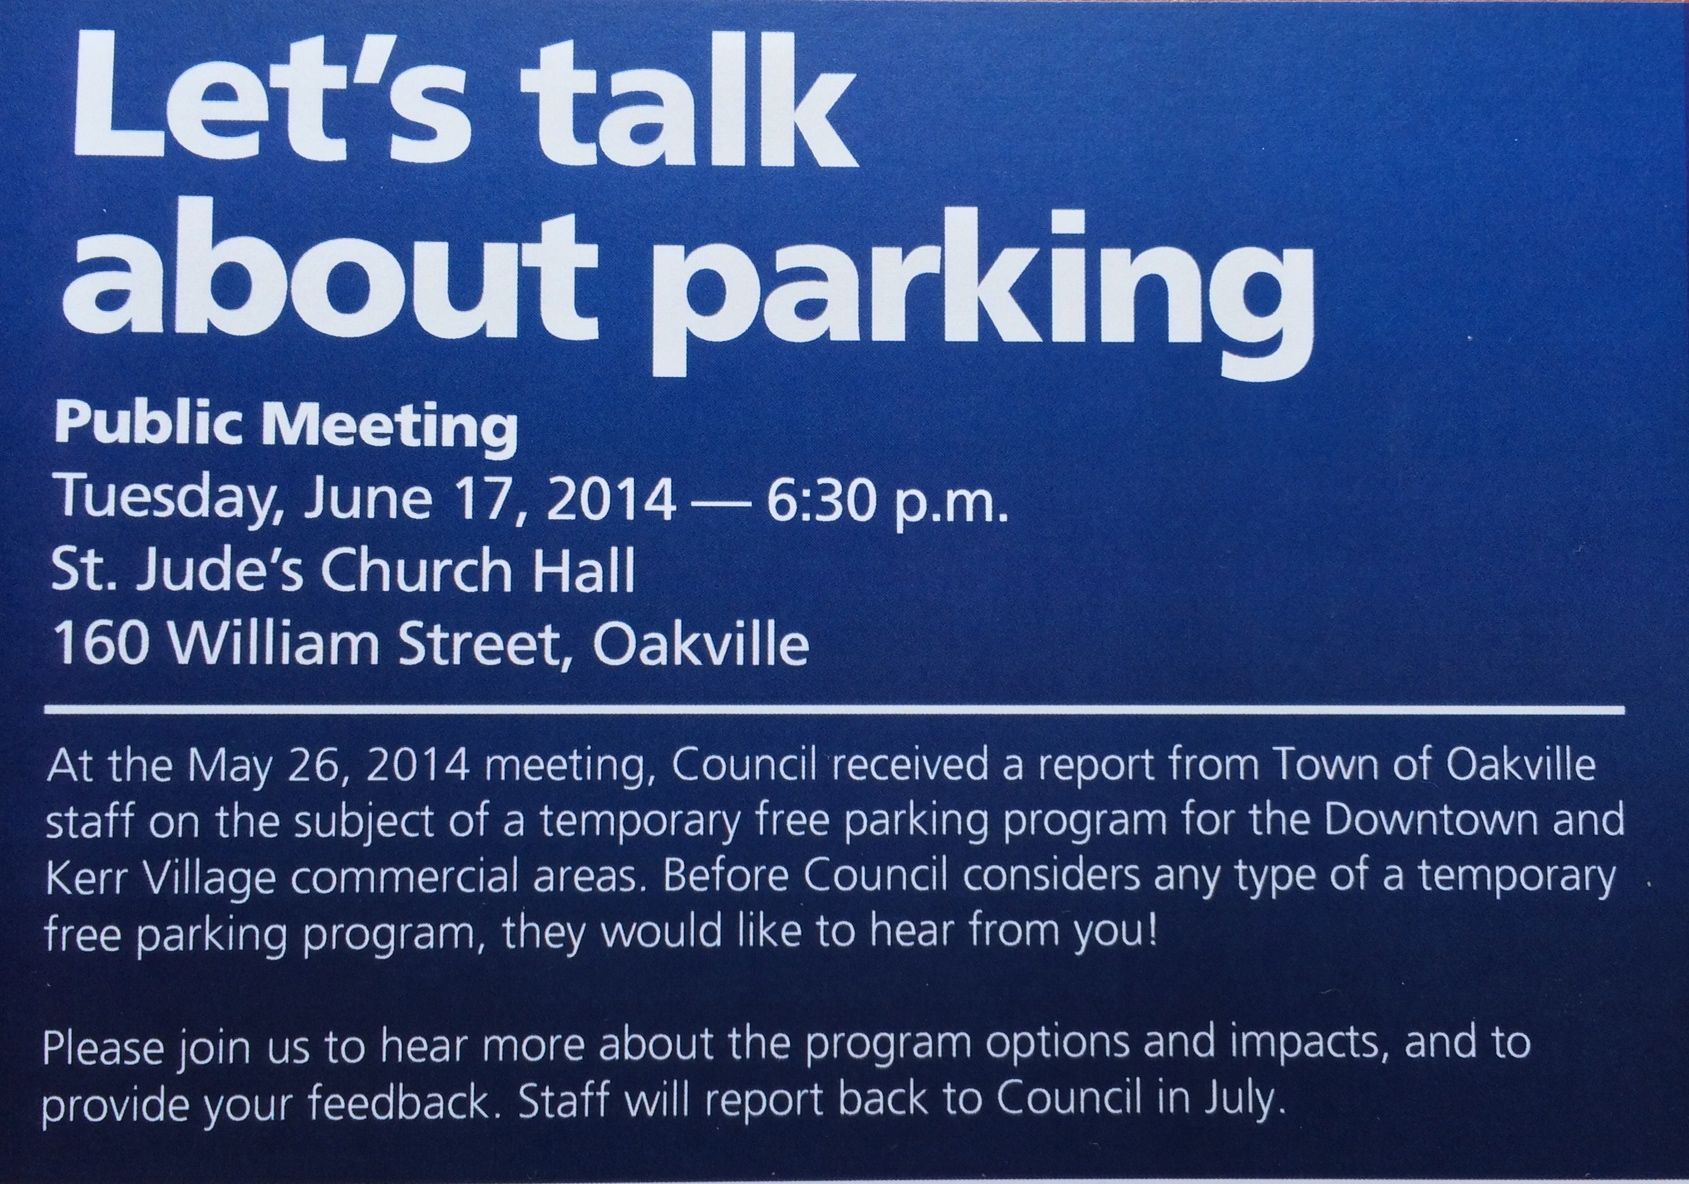 Public Meeting on Parking in Downtown Oakville and Kerr Village 